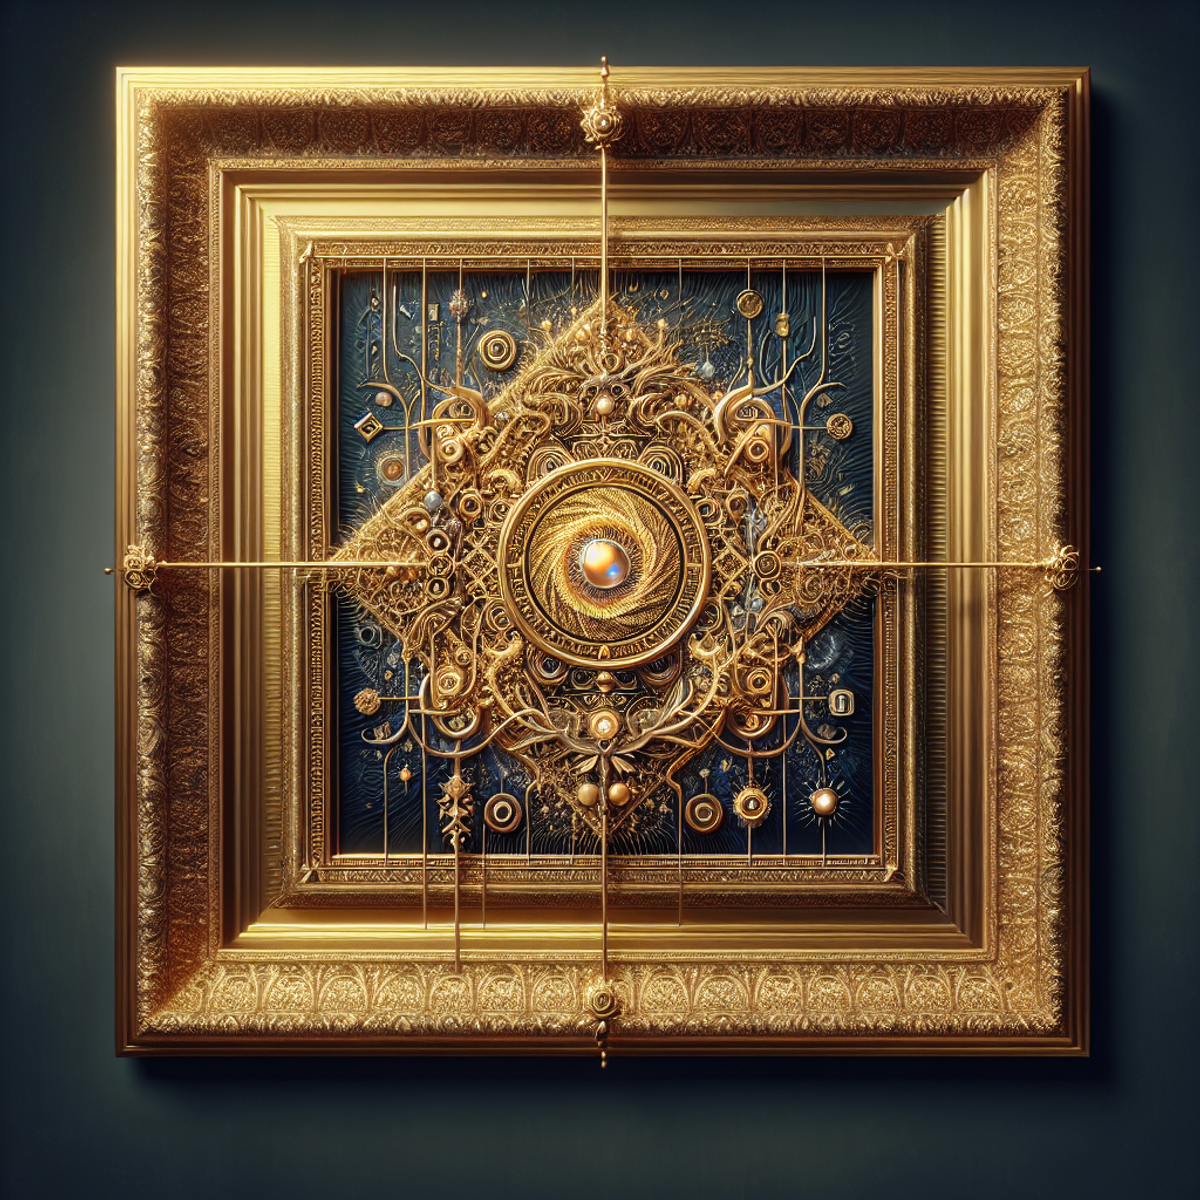 A golden picture frame with an intricate painting depicting the essence of art.